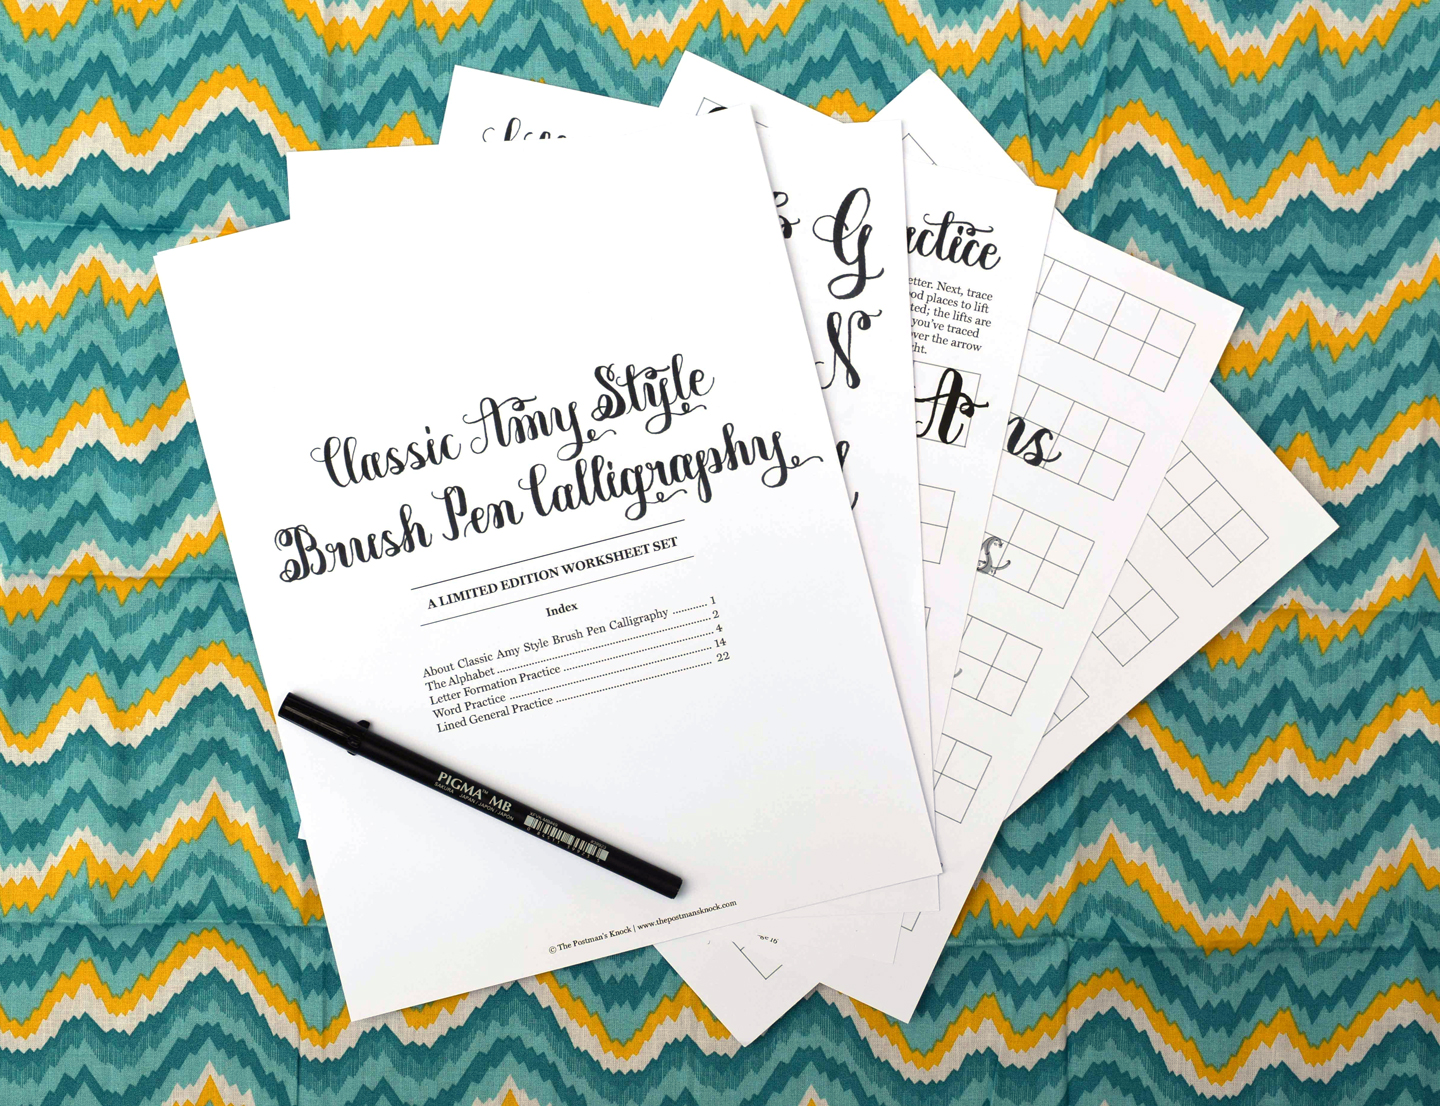 Classic Amy Style BRUSH PEN Calligraphy Worksheet: Limited Edition